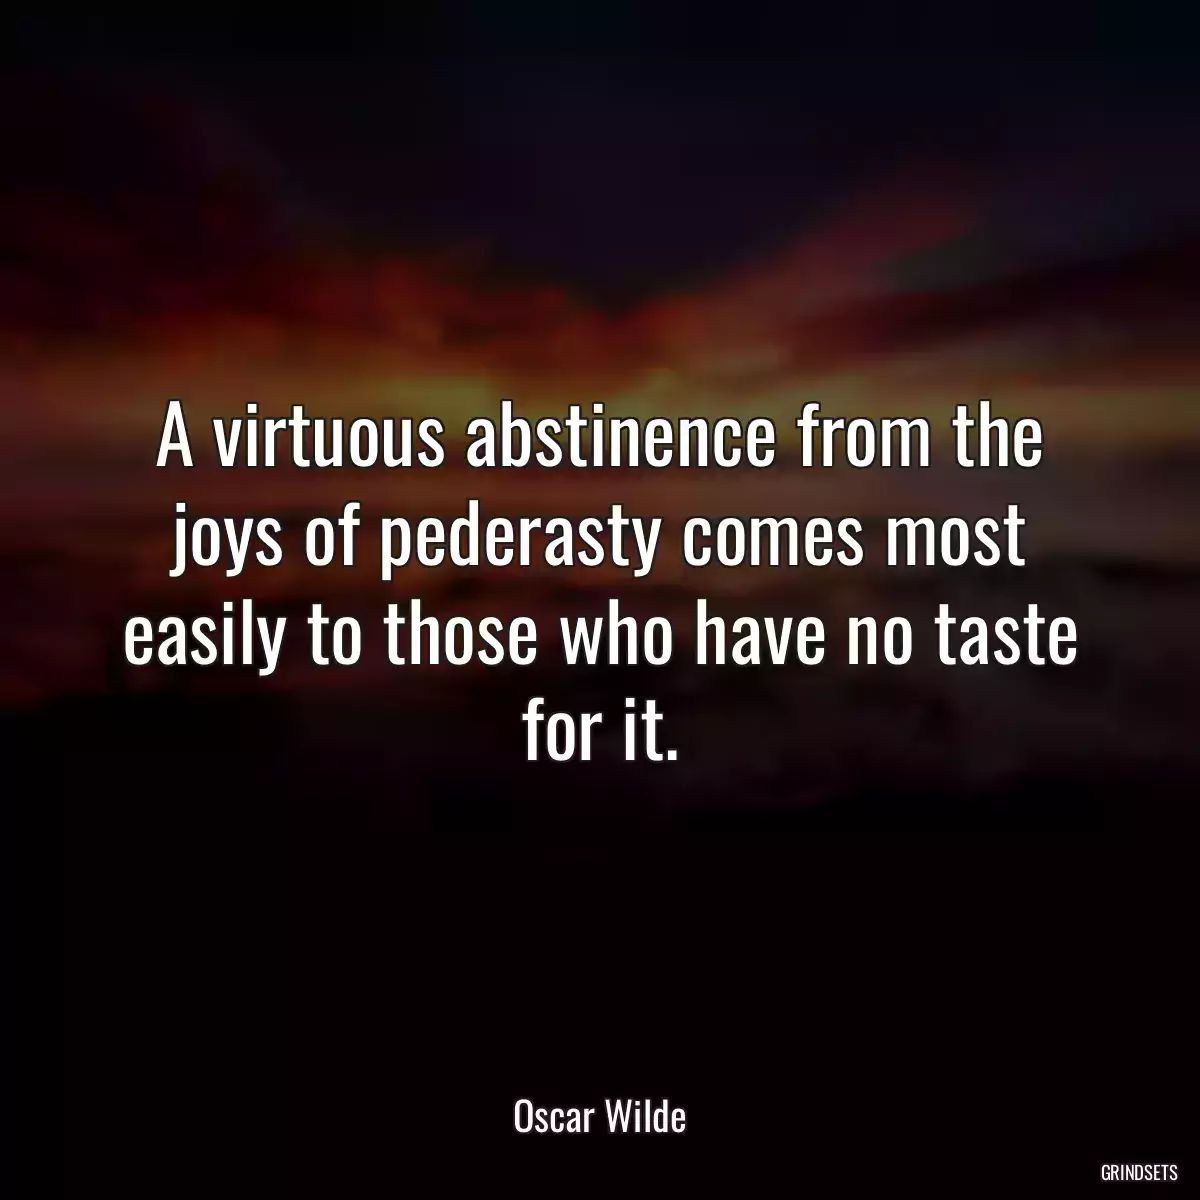 A virtuous abstinence from the joys of pederasty comes most easily to those who have no taste for it.